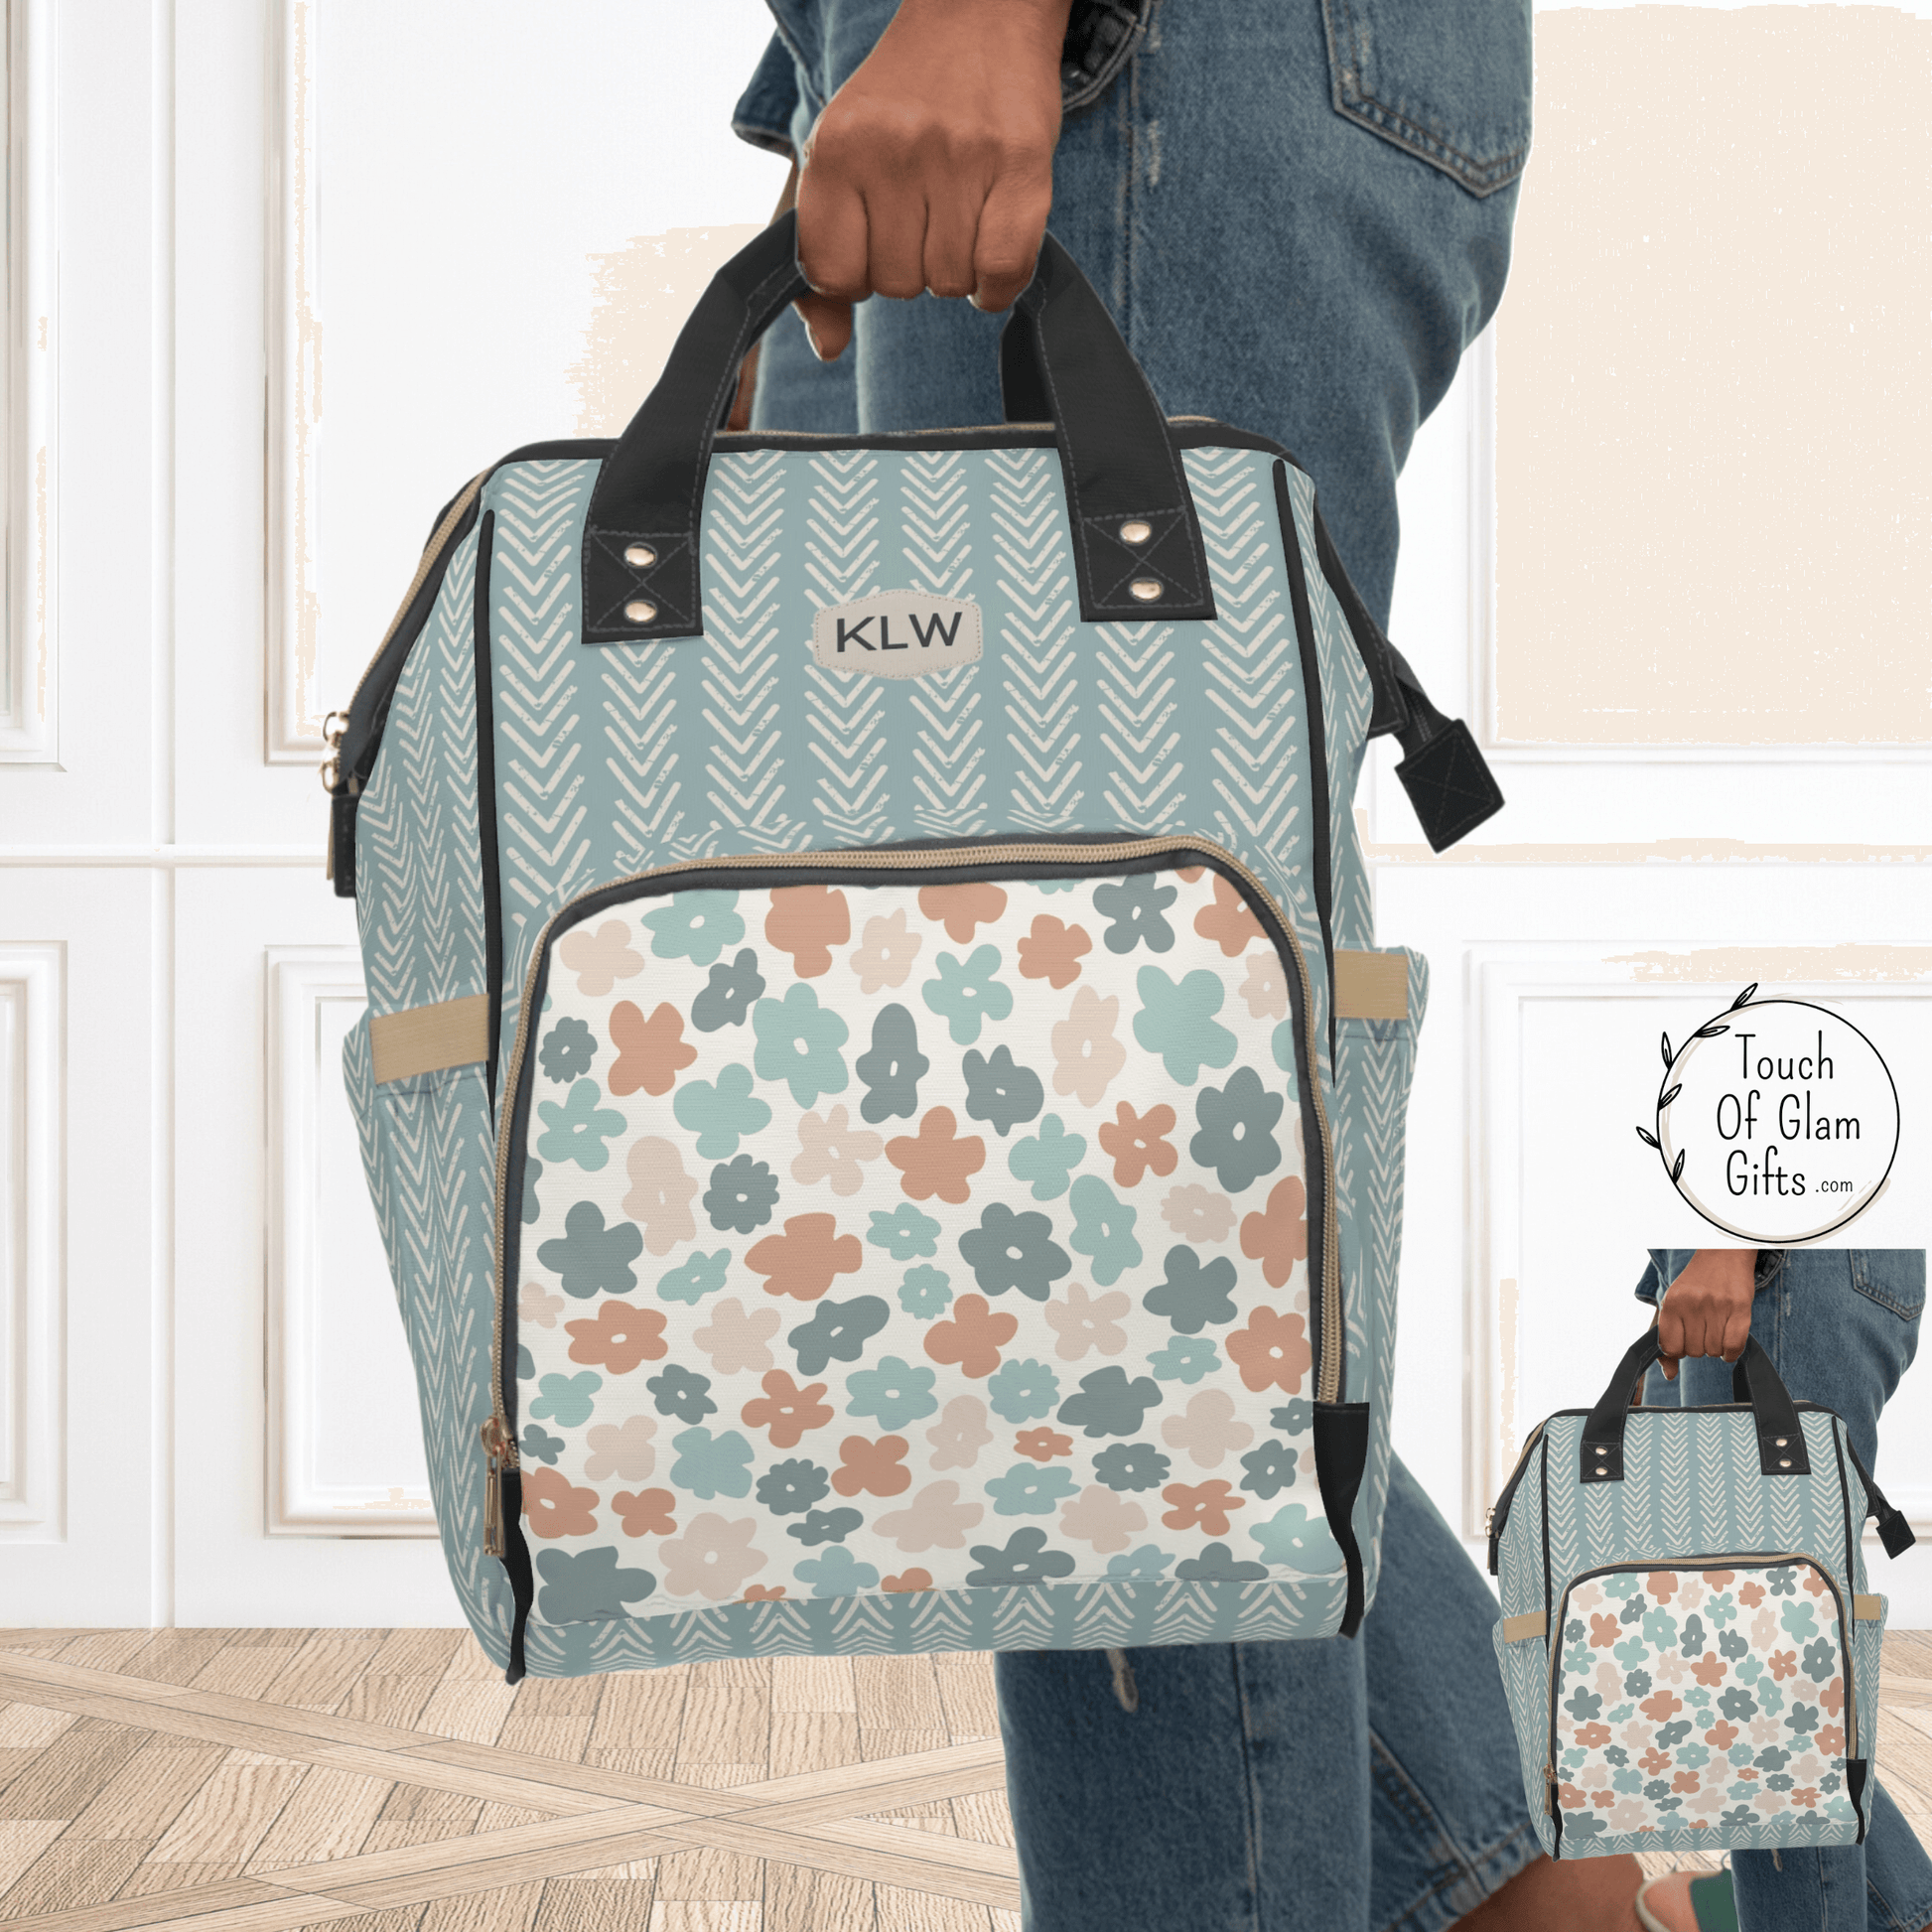 Our boho diaper bag has a sturdy carrying handle on the top and is shown in the plain version, with no monogramming, and the cream color patch with three initials for the perfect personalized baby gift.